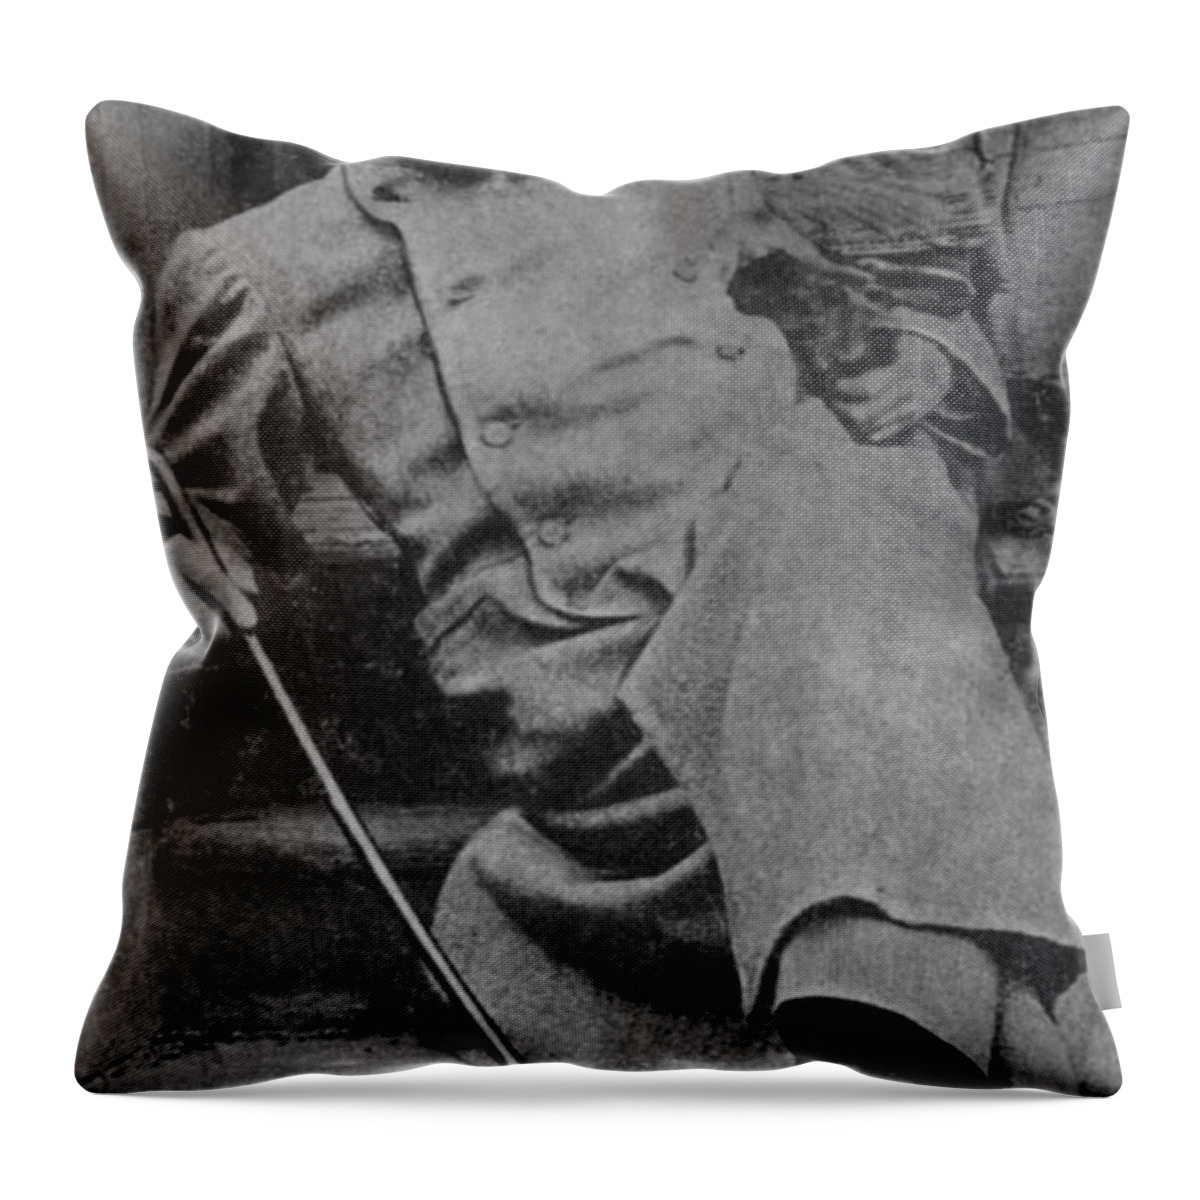 History Throw Pillow featuring the photograph Anton Chekhov, Russian Physician by Photo Researchers